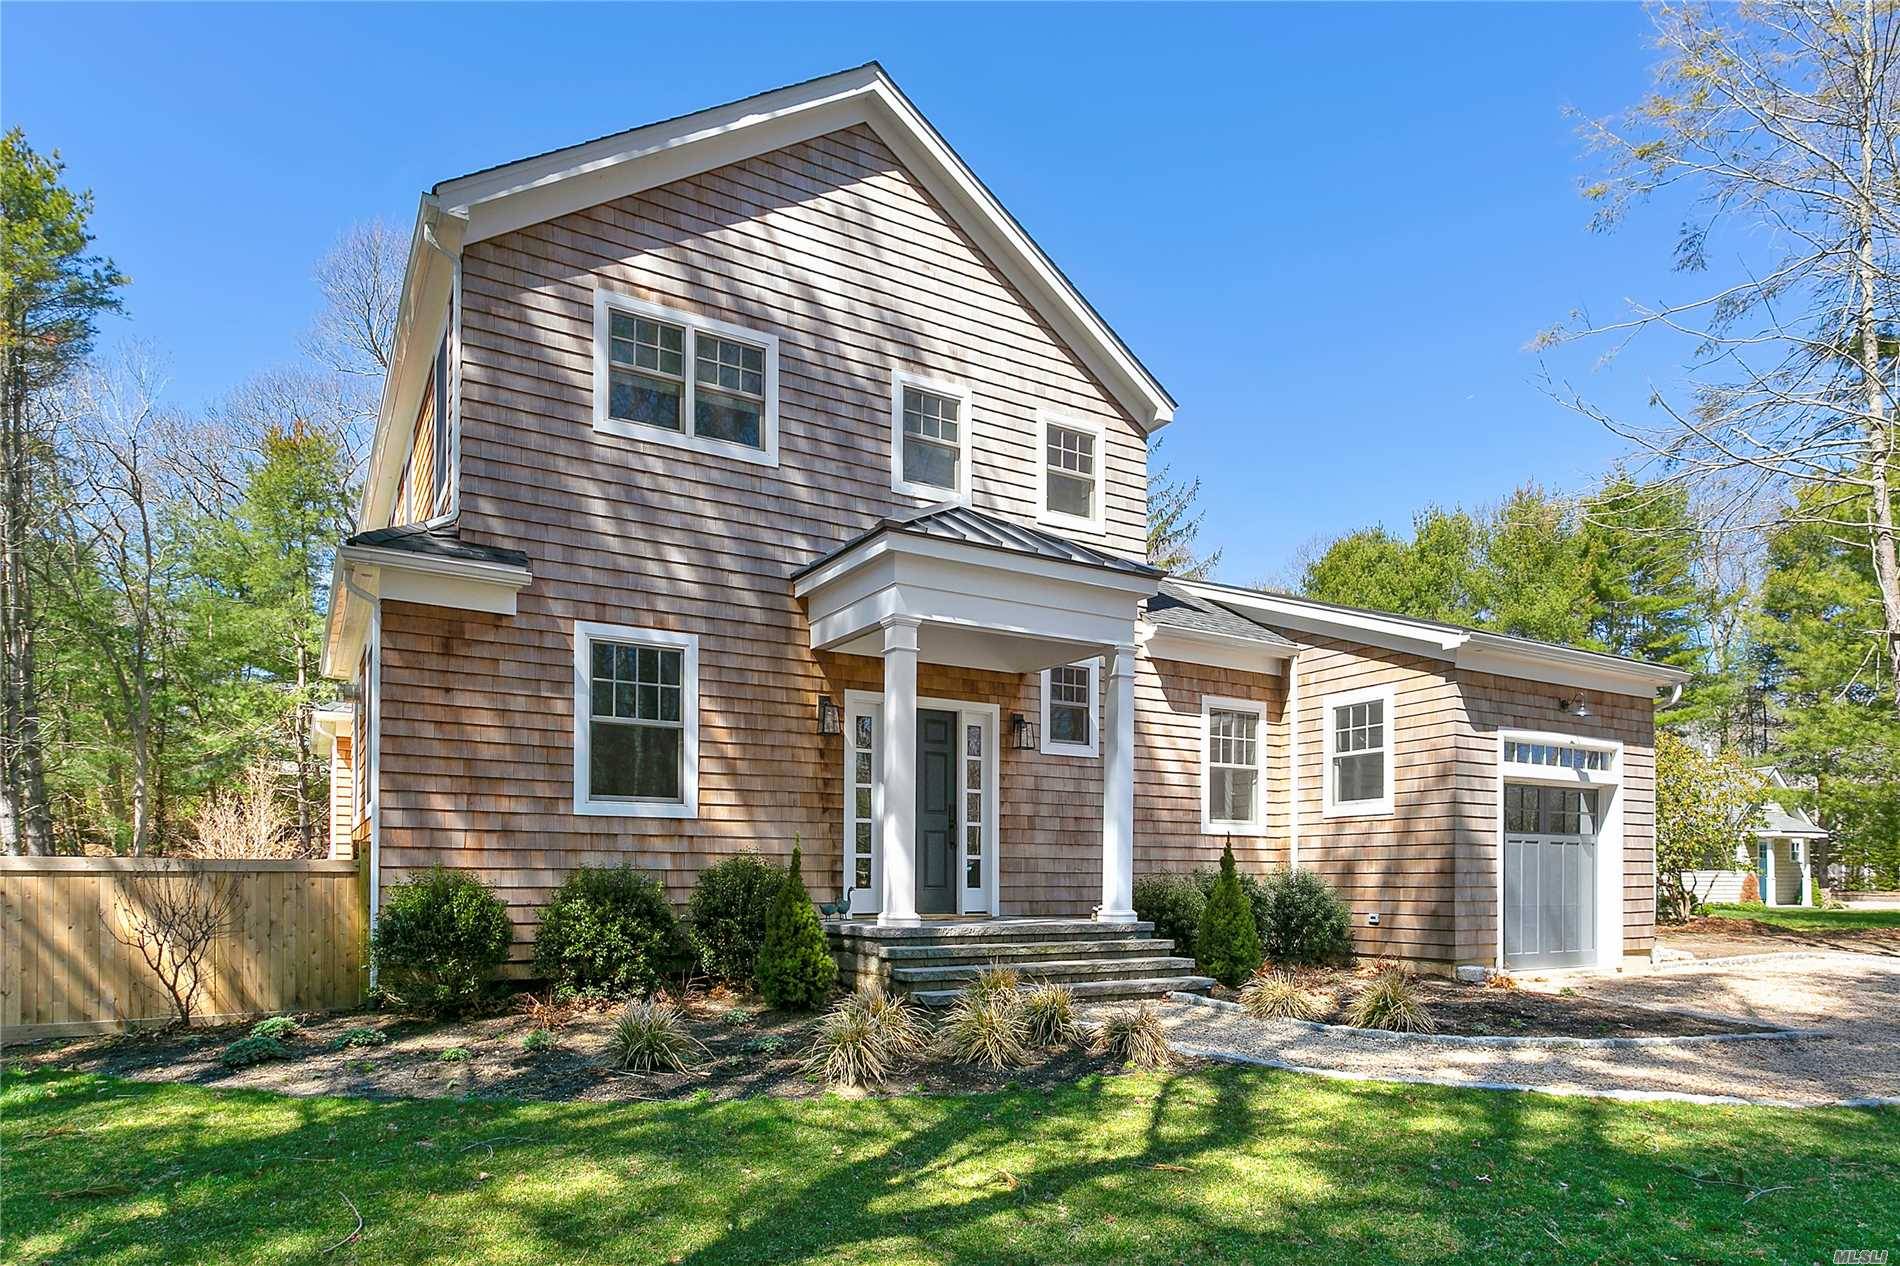 This beautifully designed new construction is just a short distance to the heart of Amagansett.